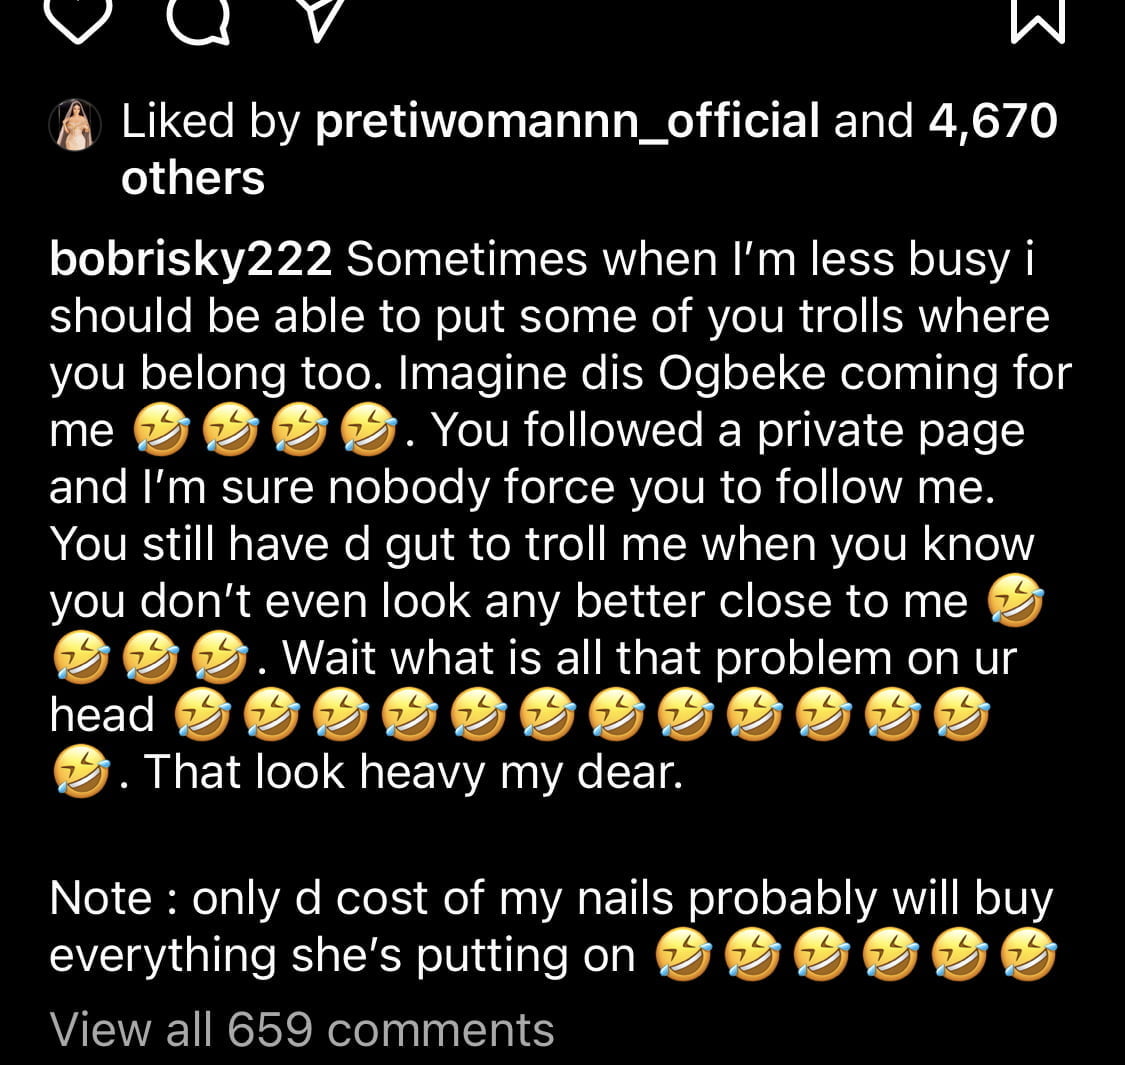 Bobrisky’s post online calling out an alleged troll 